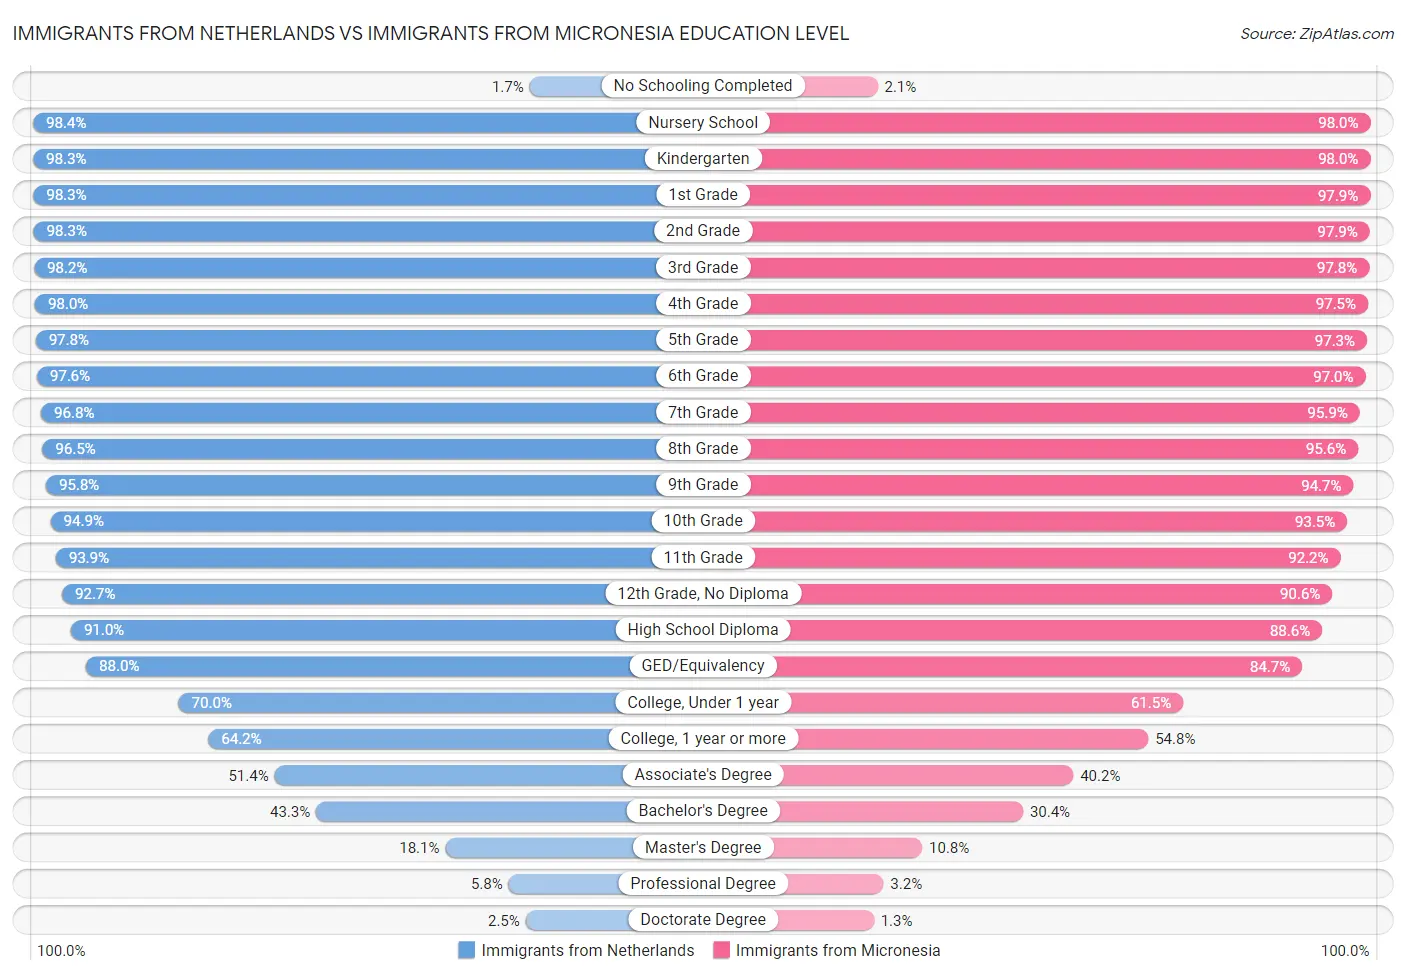 Immigrants from Netherlands vs Immigrants from Micronesia Education Level